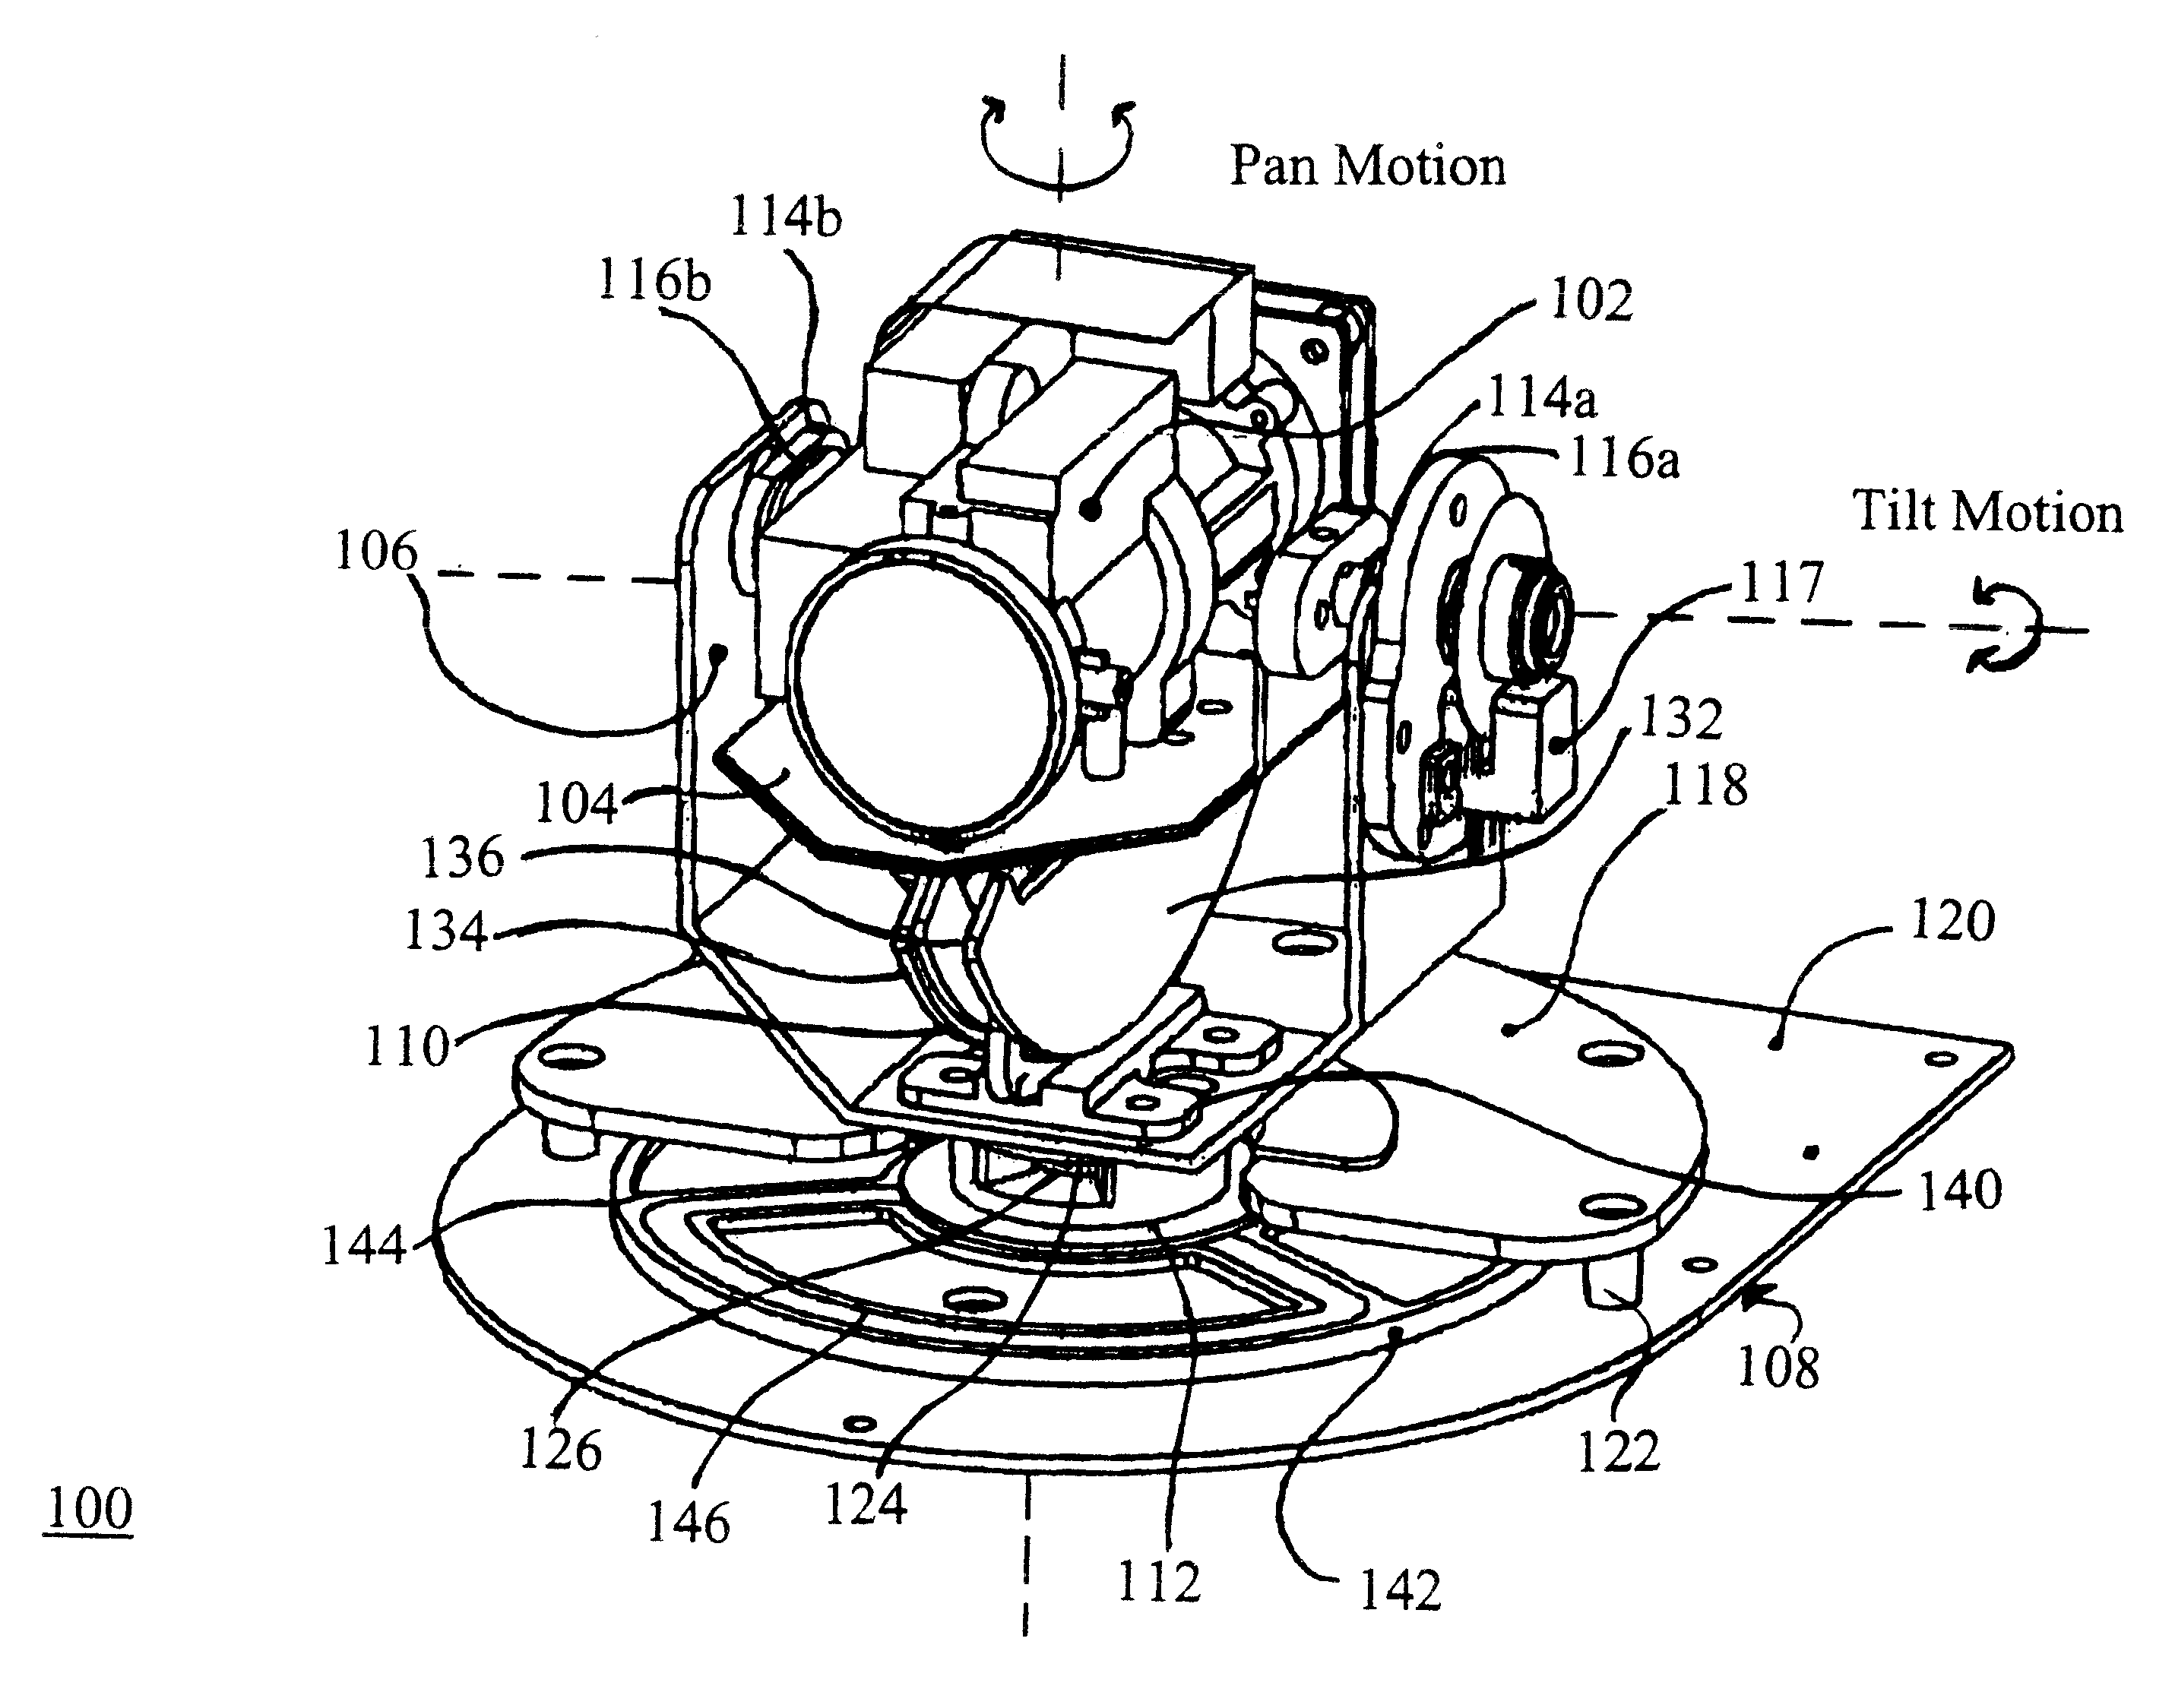 Device for rotatably positioning a camera or similar article about two orthogonal axes